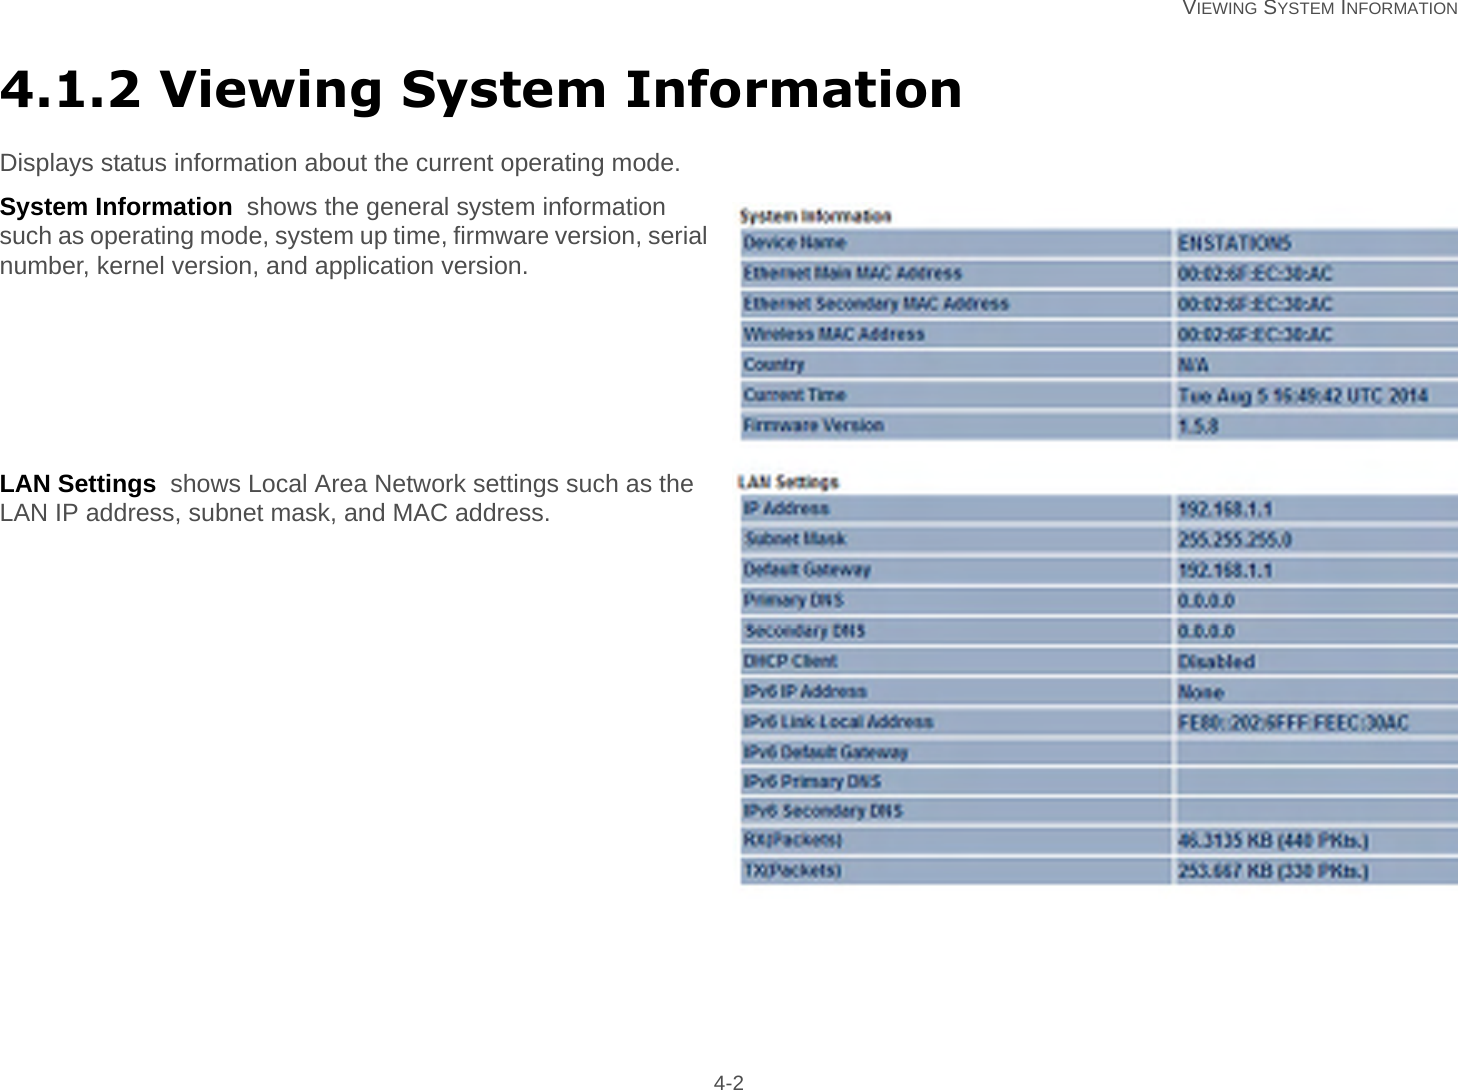   VIEWING SYSTEM INFORMATION 4-24.1.2 Viewing System InformationDisplays status information about the current operating mode.System Information  shows the general system information such as operating mode, system up time, firmware version, serial number, kernel version, and application version.LAN Settings  shows Local Area Network settings such as the LAN IP address, subnet mask, and MAC address.